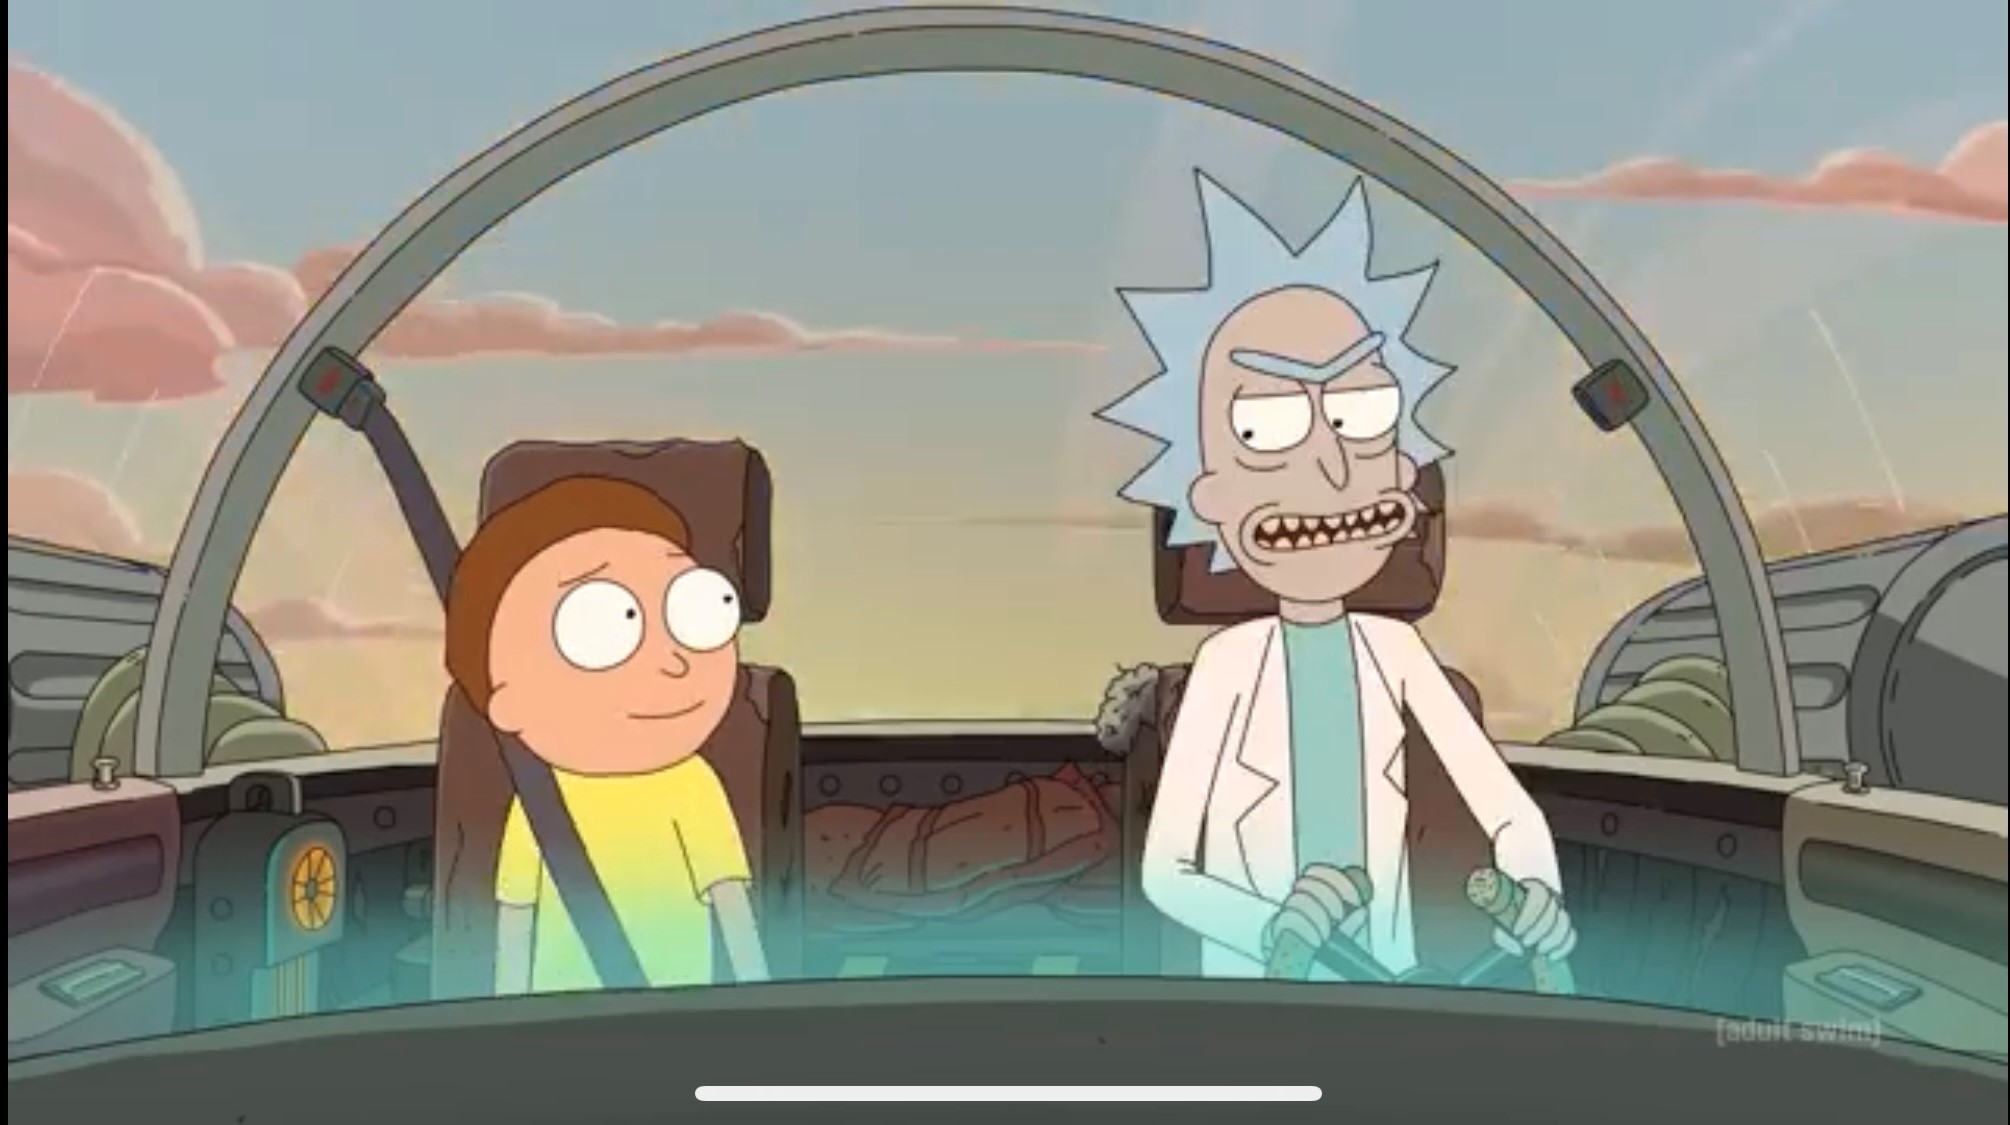 About: Wallpaper for Rick-And-Morty (Google Play version)